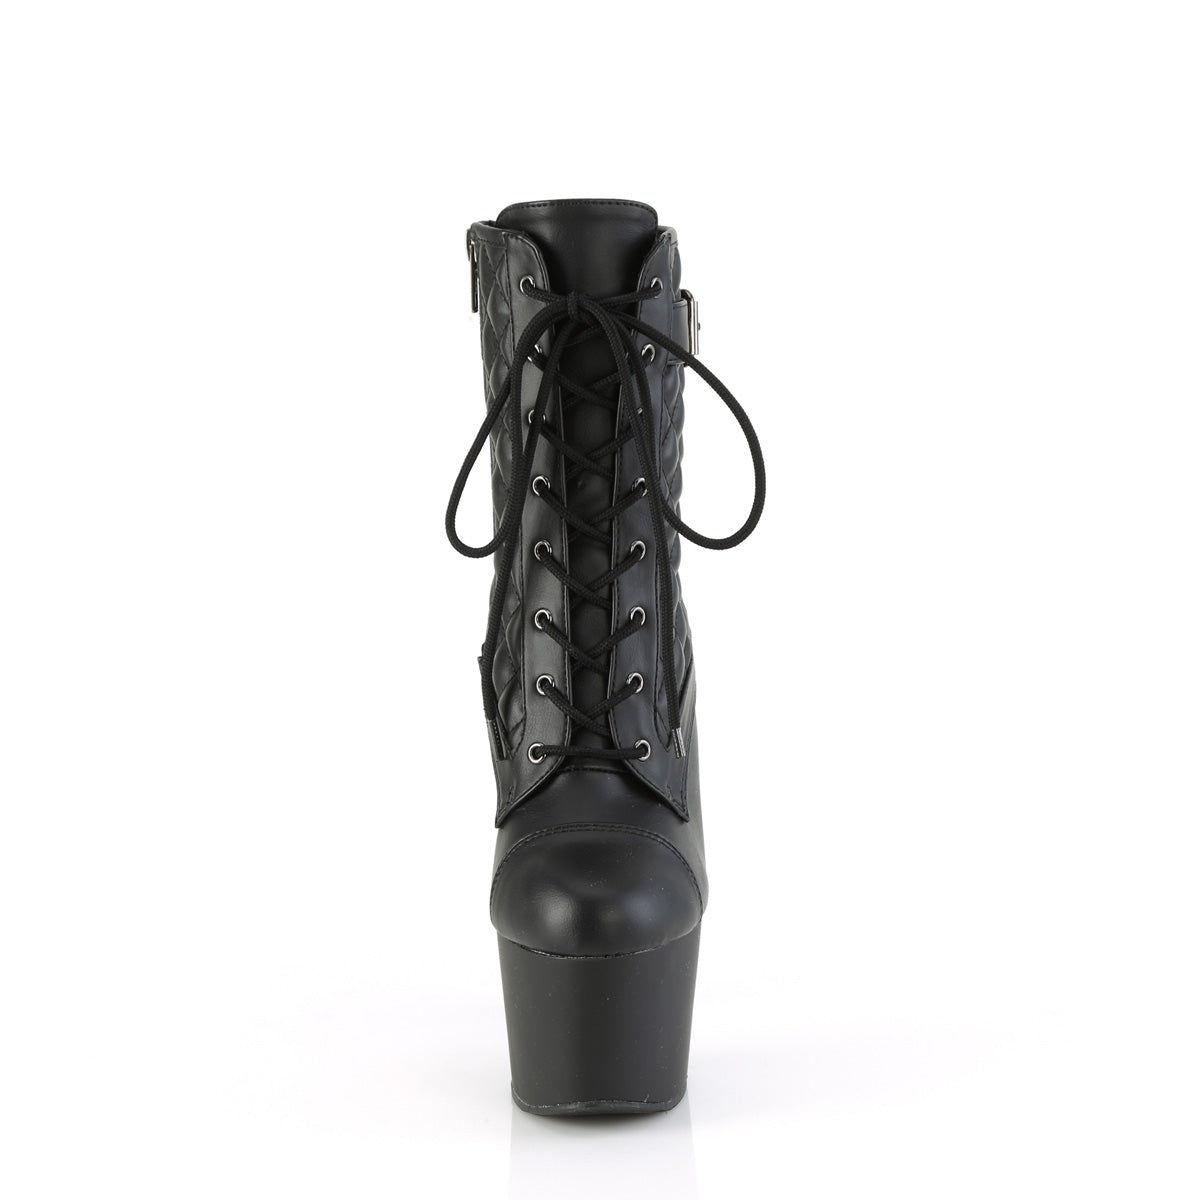 ADORE-1033 Pleaser Black Faux Leather Exotic Dancing Ankle Boots